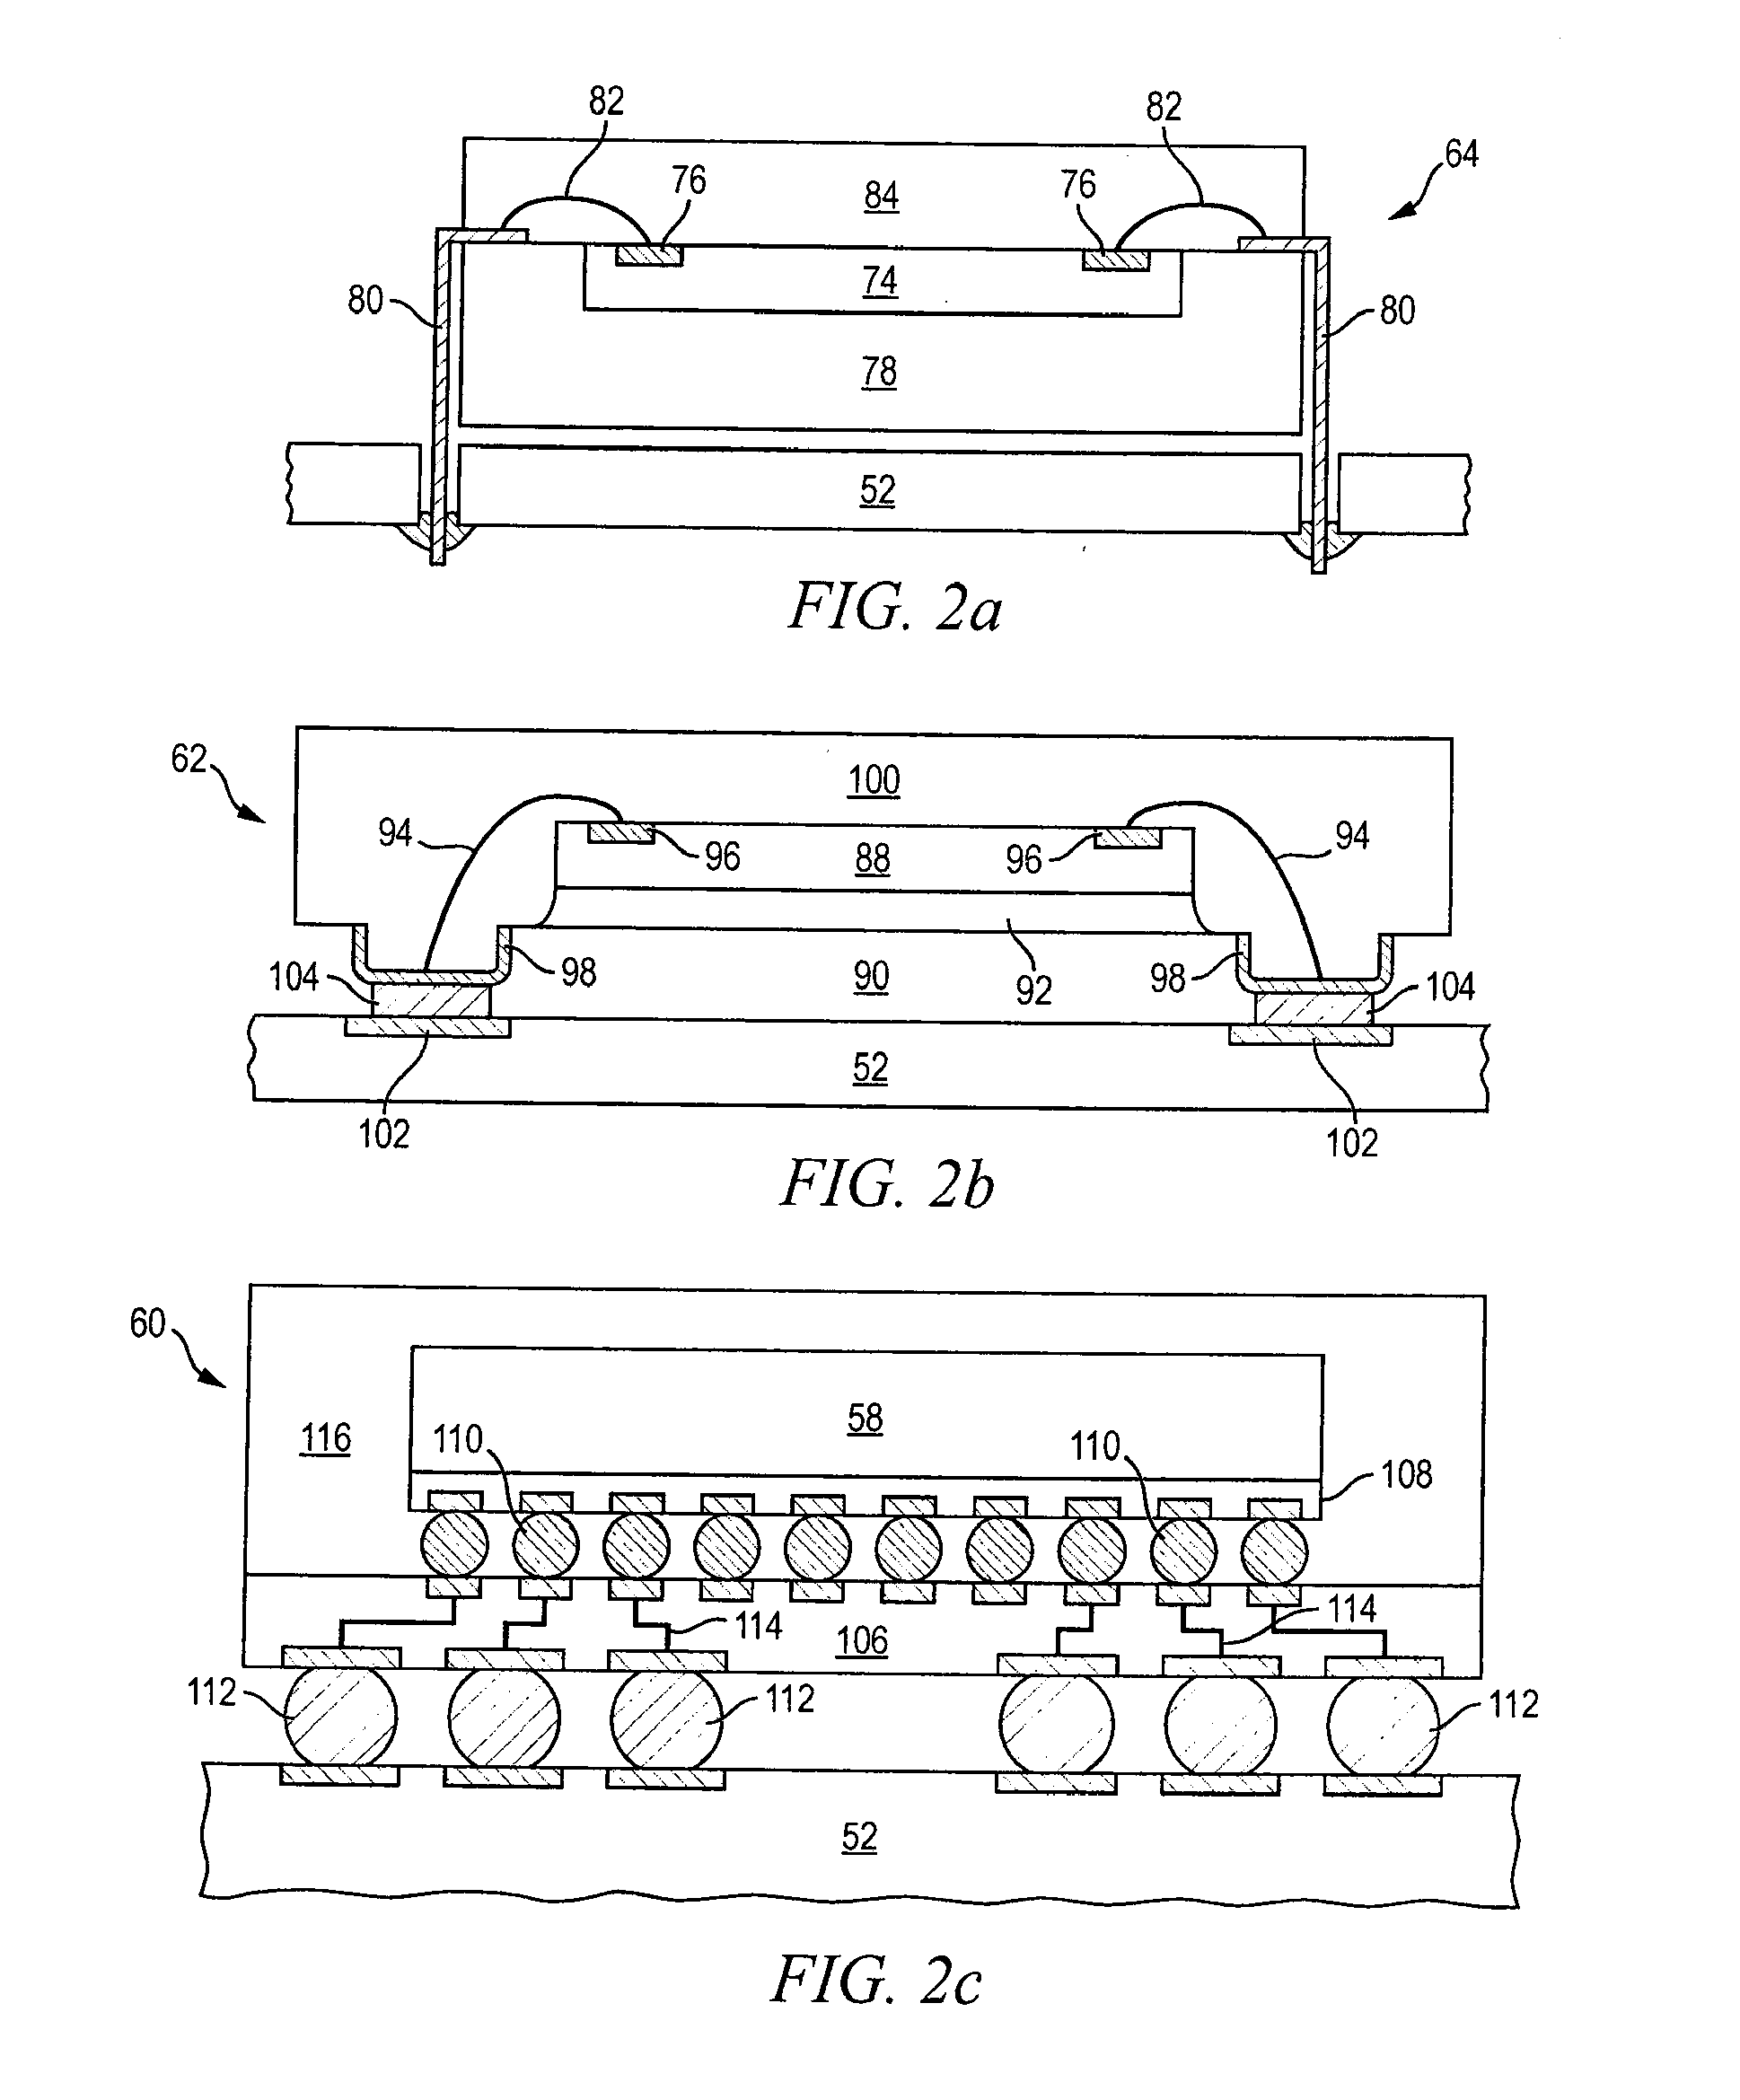 Semiconductor Device and Method of Forming Conductive Vias Through Interconnect Structures and Encapsulant of WLCSP